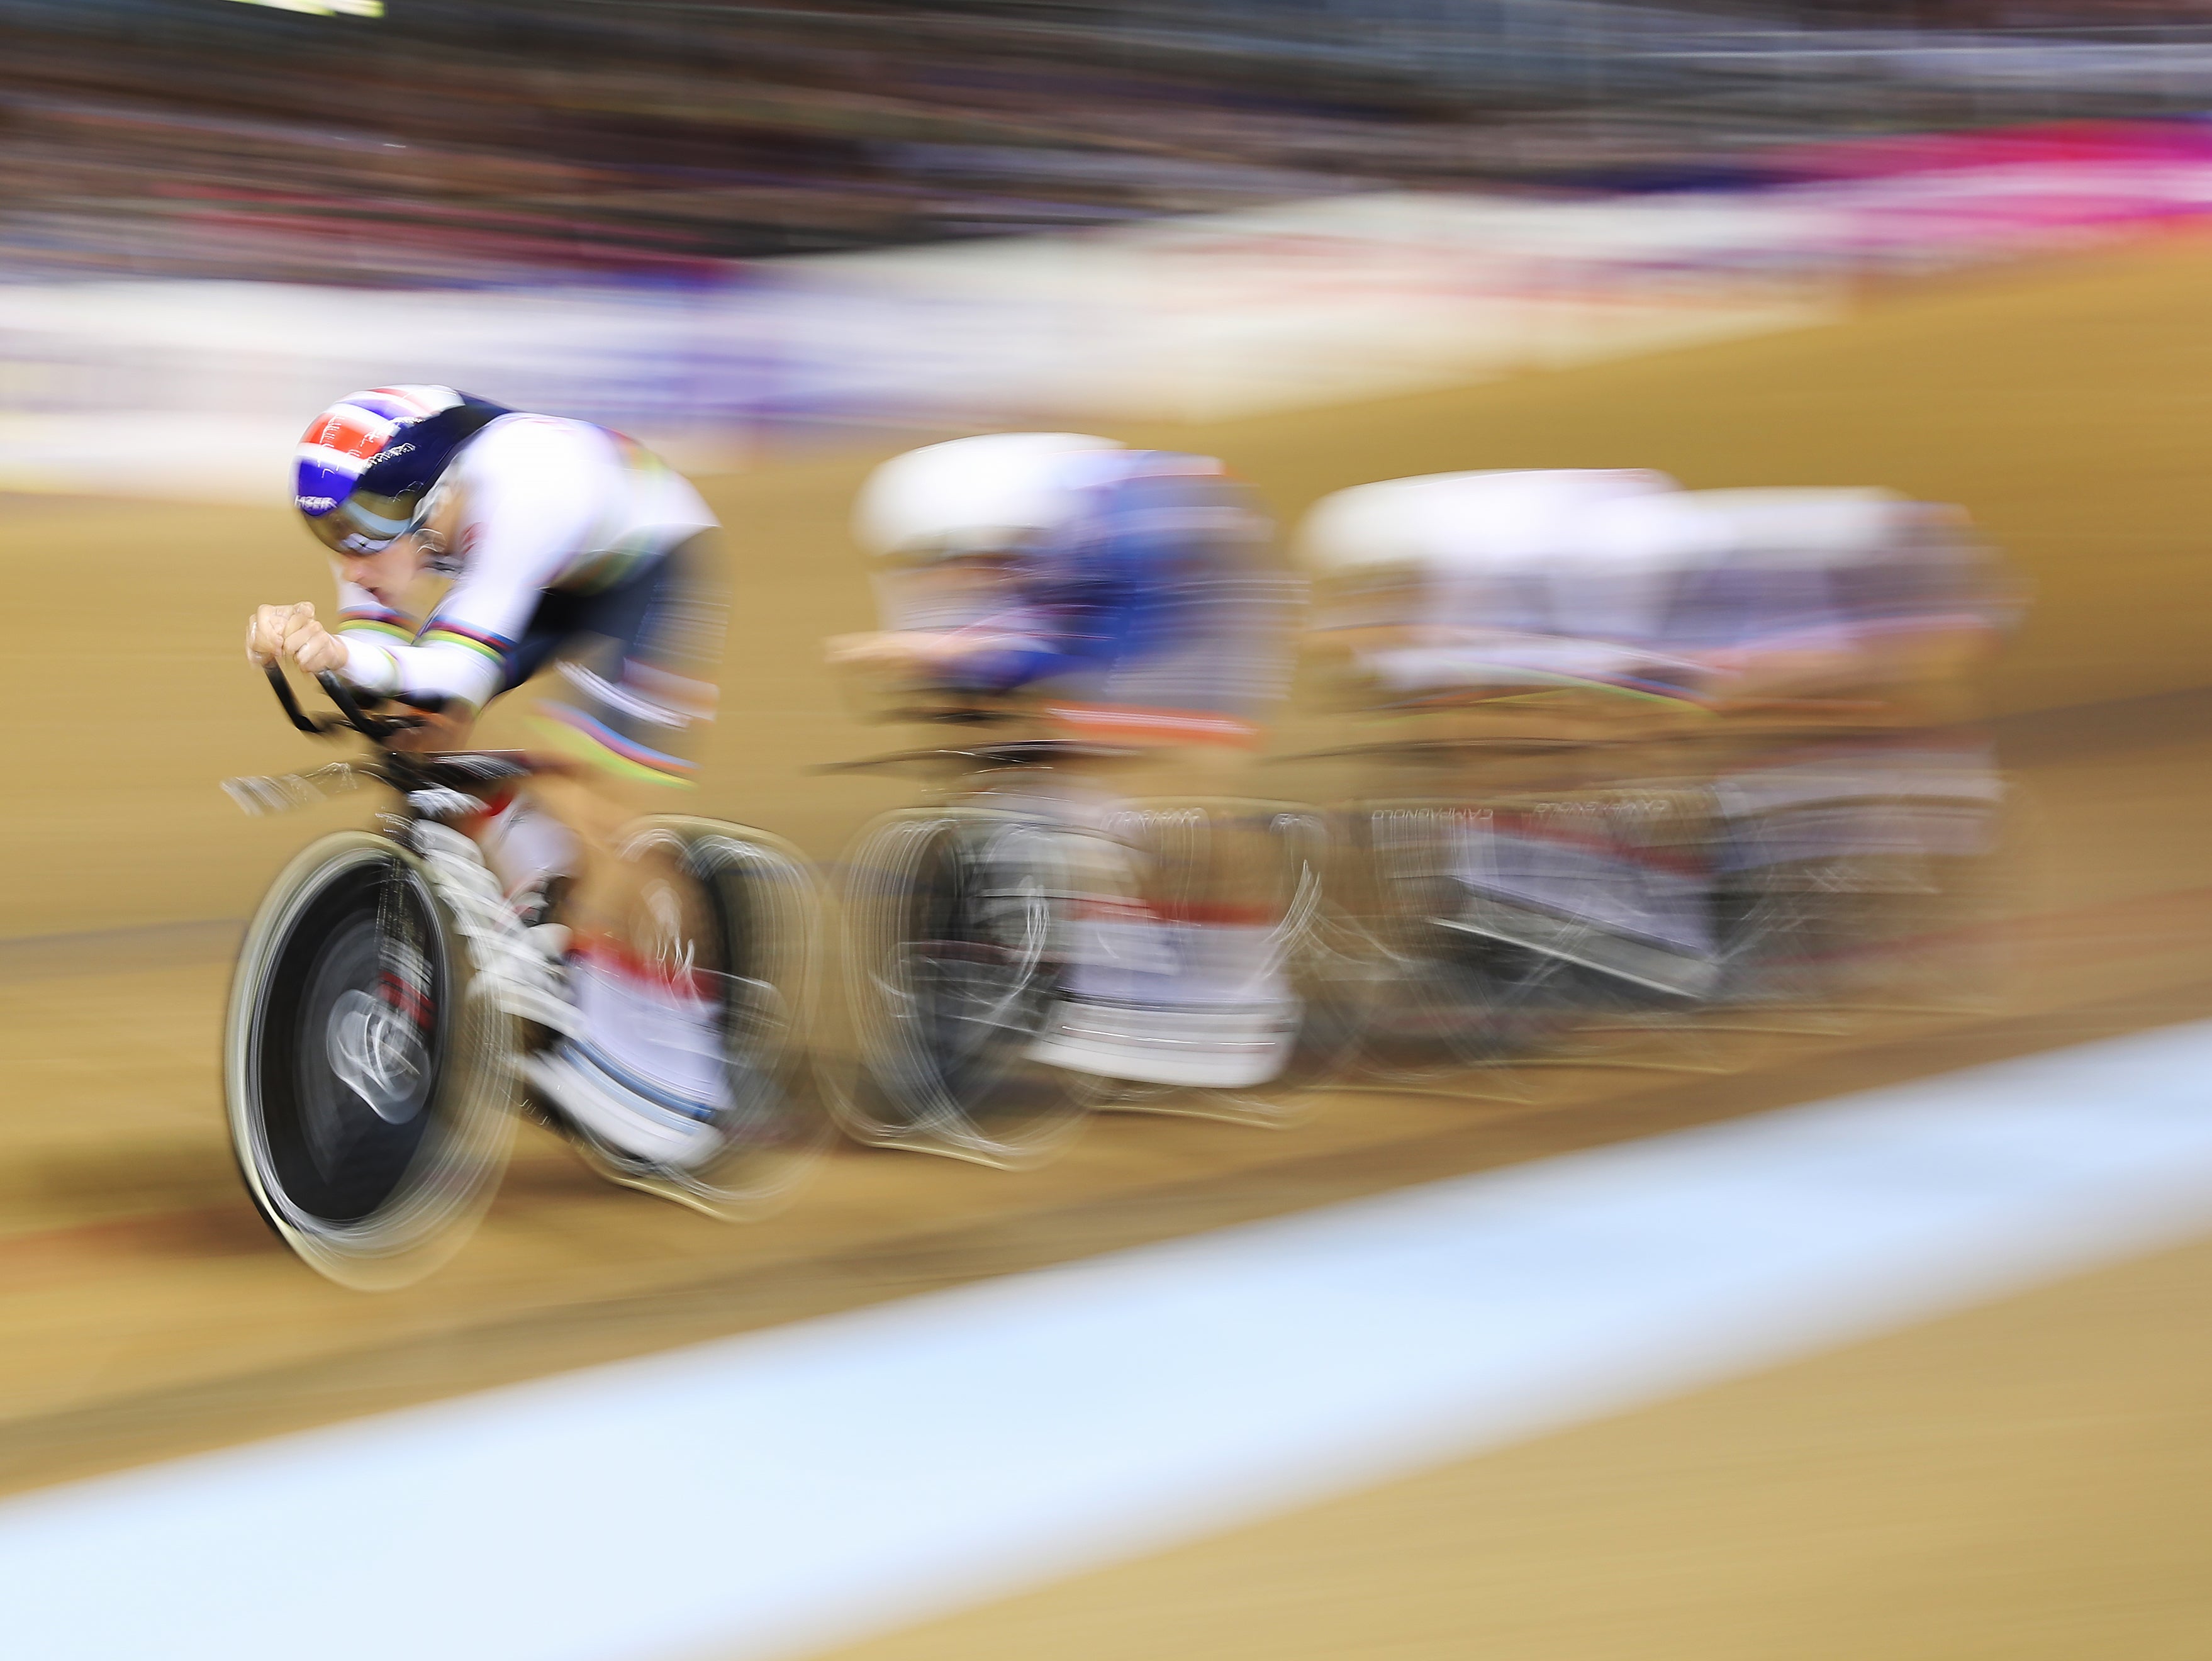 British Cycling has signed an eight-year partnership with the energy company